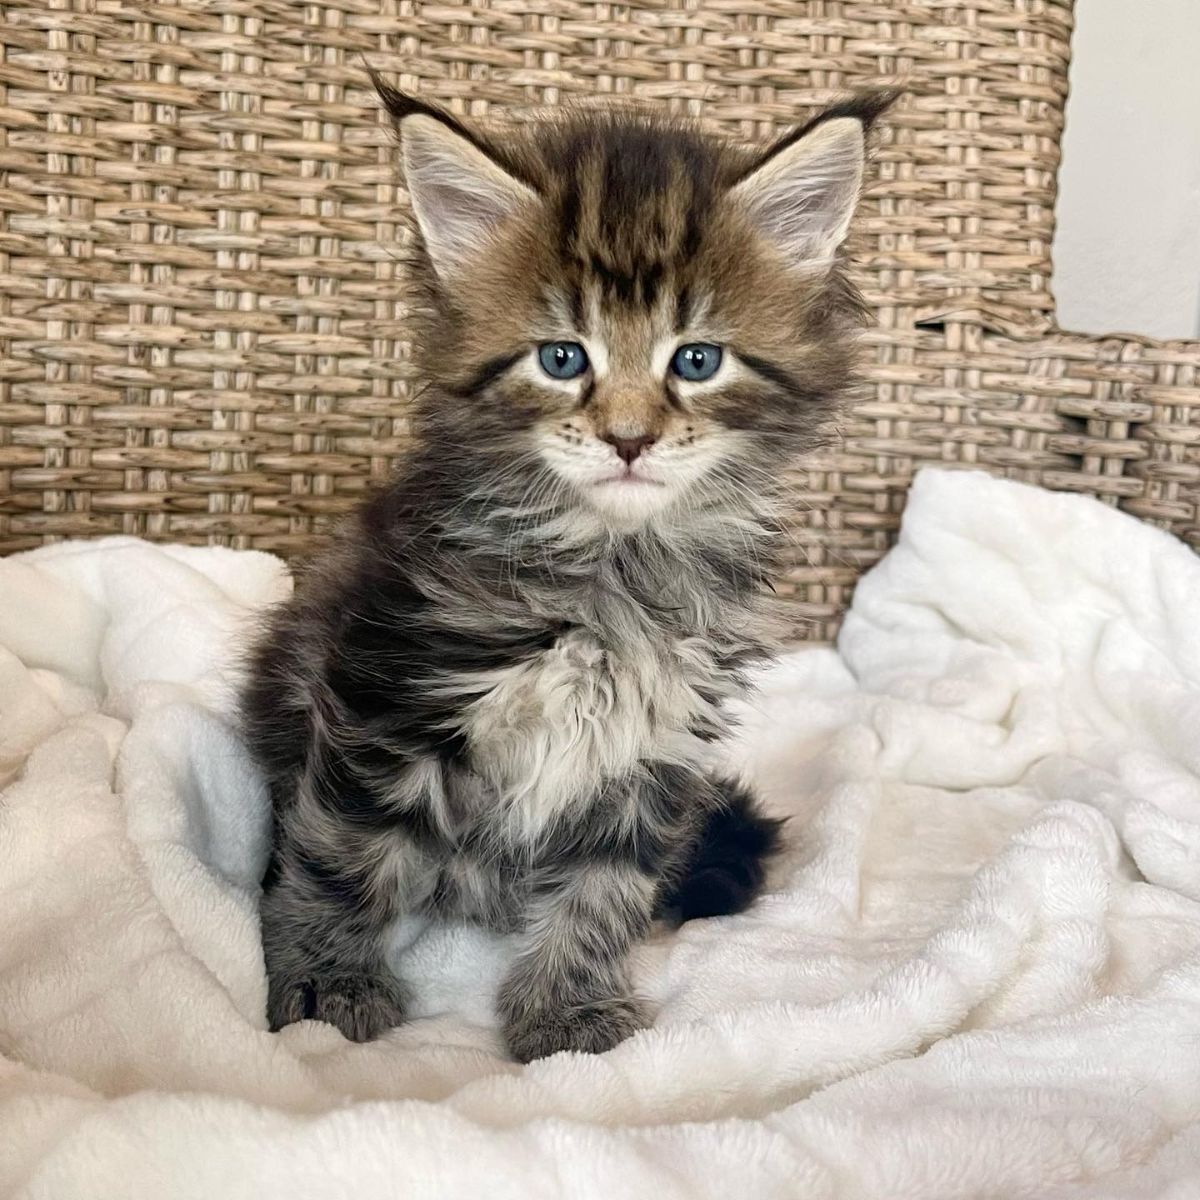 A cute tabby maine coon kitten sitting on a white blanket.